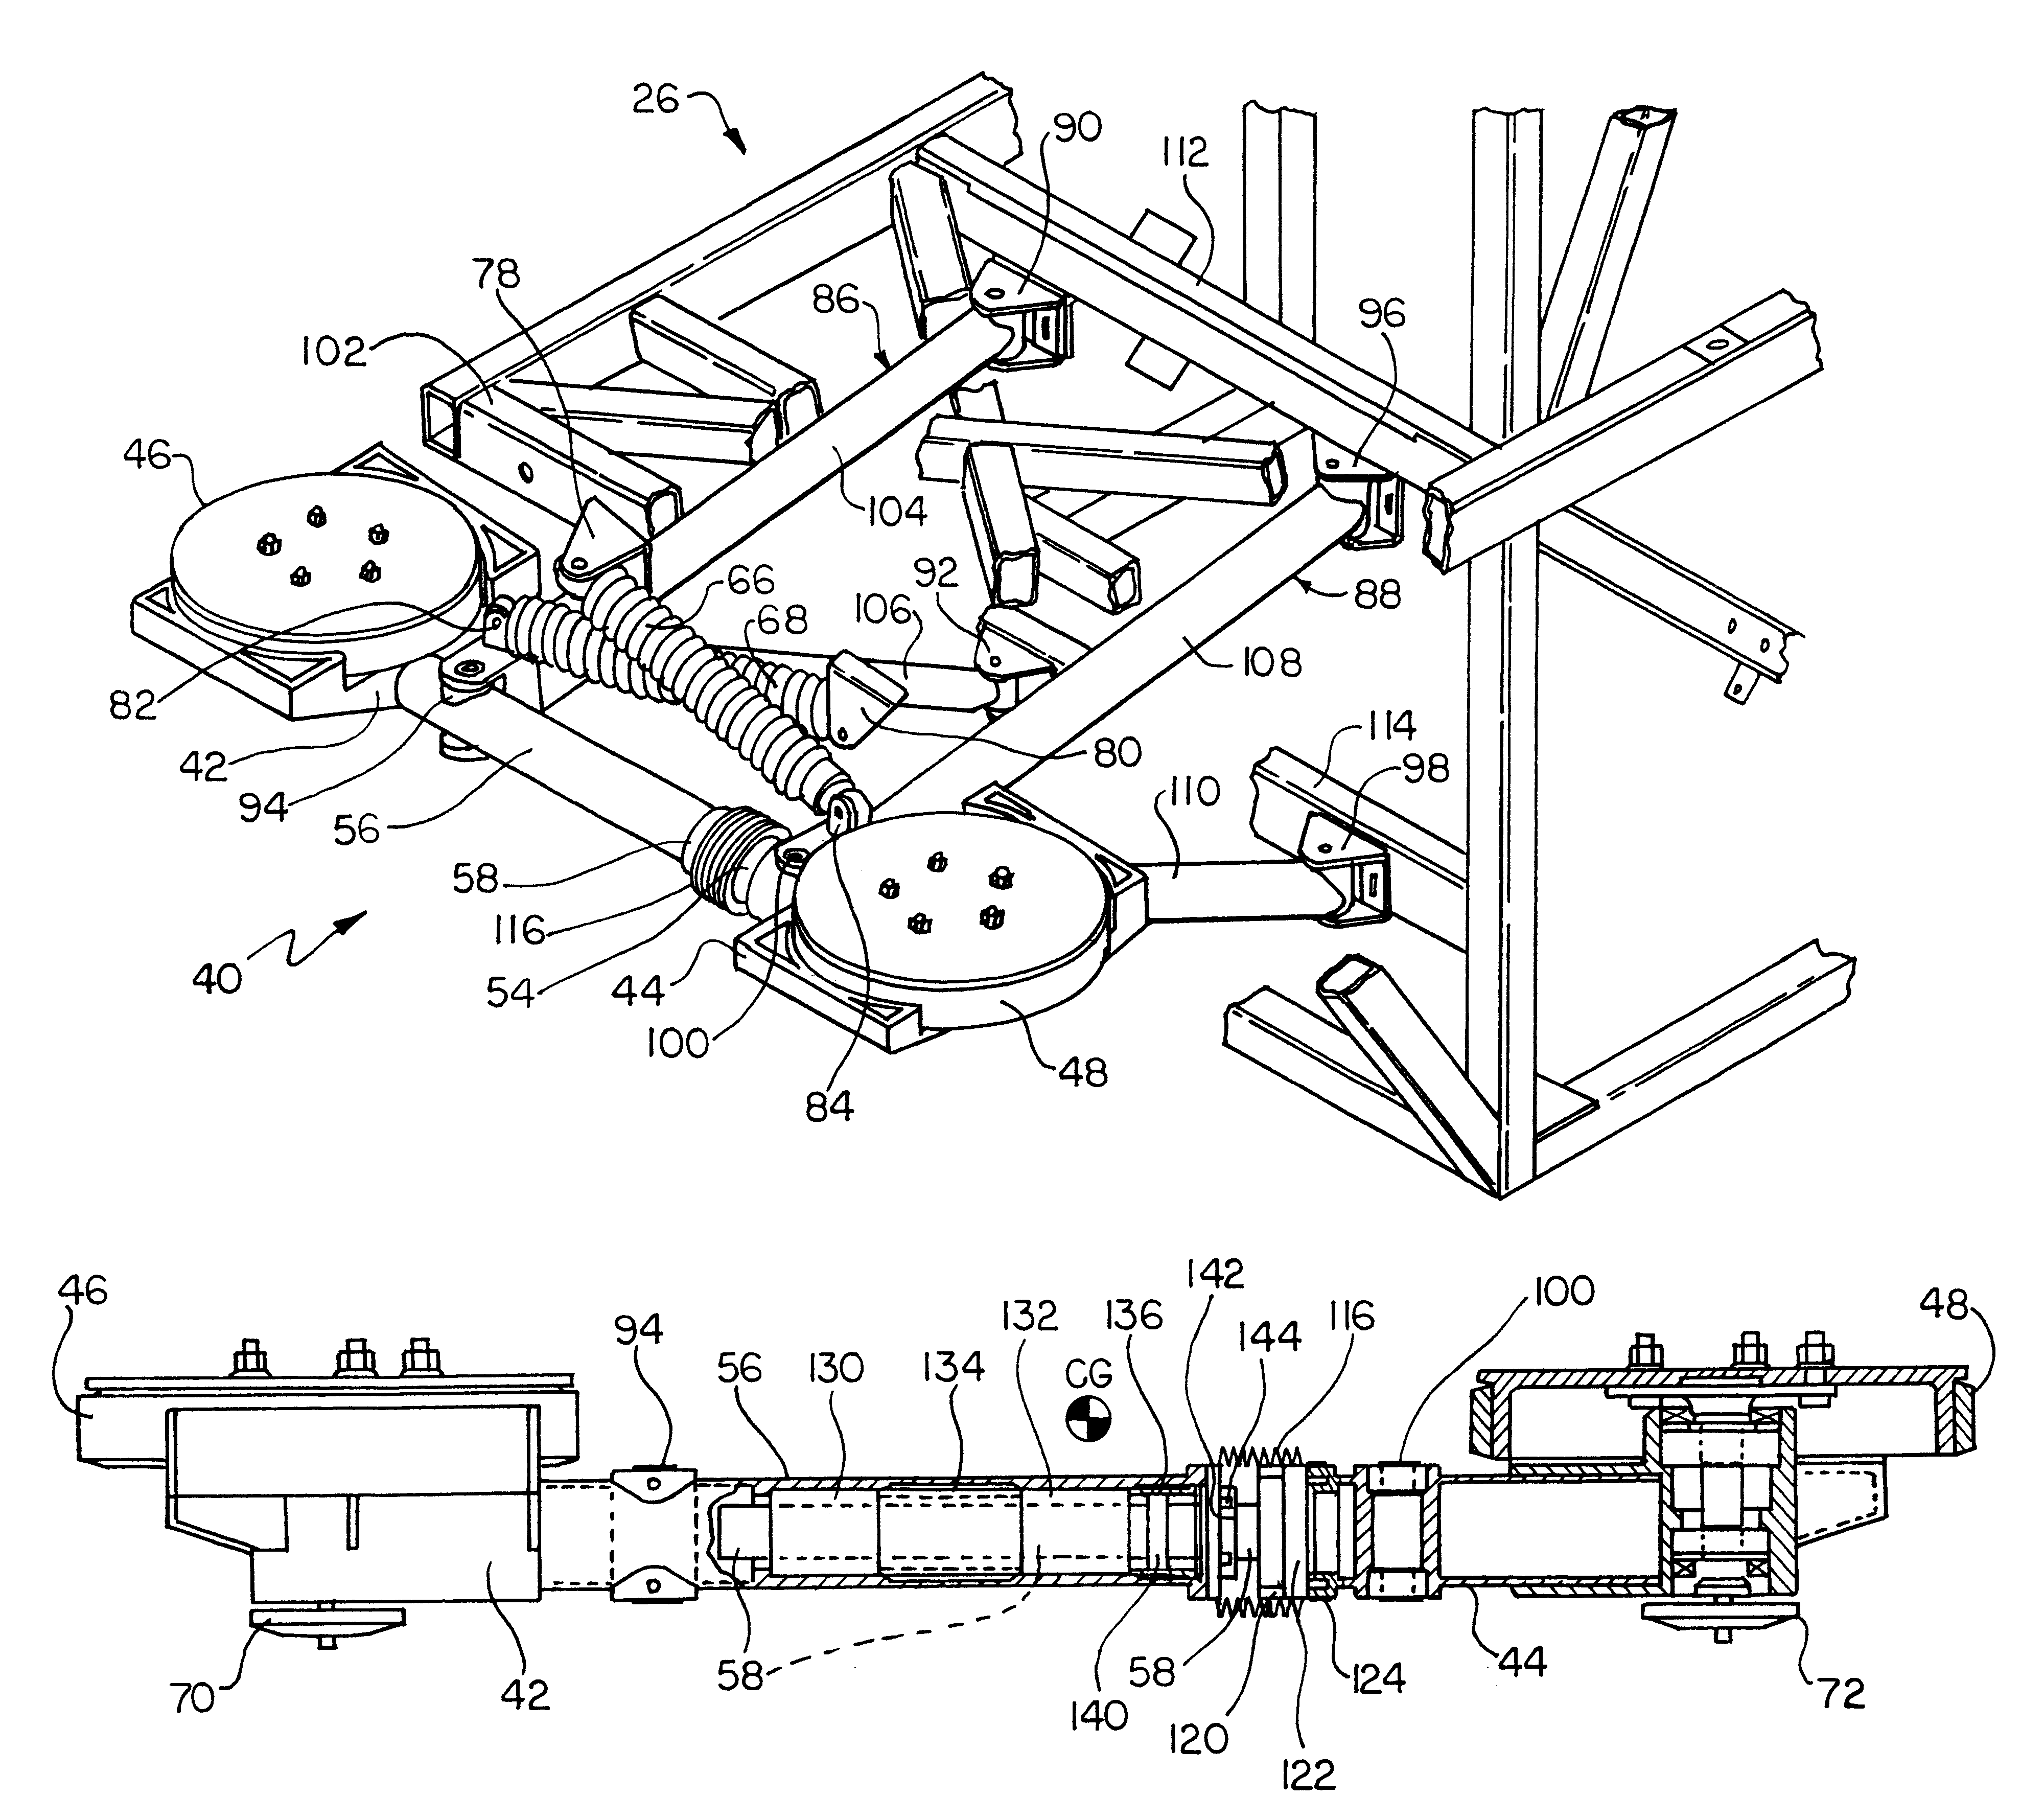 Lateral suspension assembly for a guided vehicle system